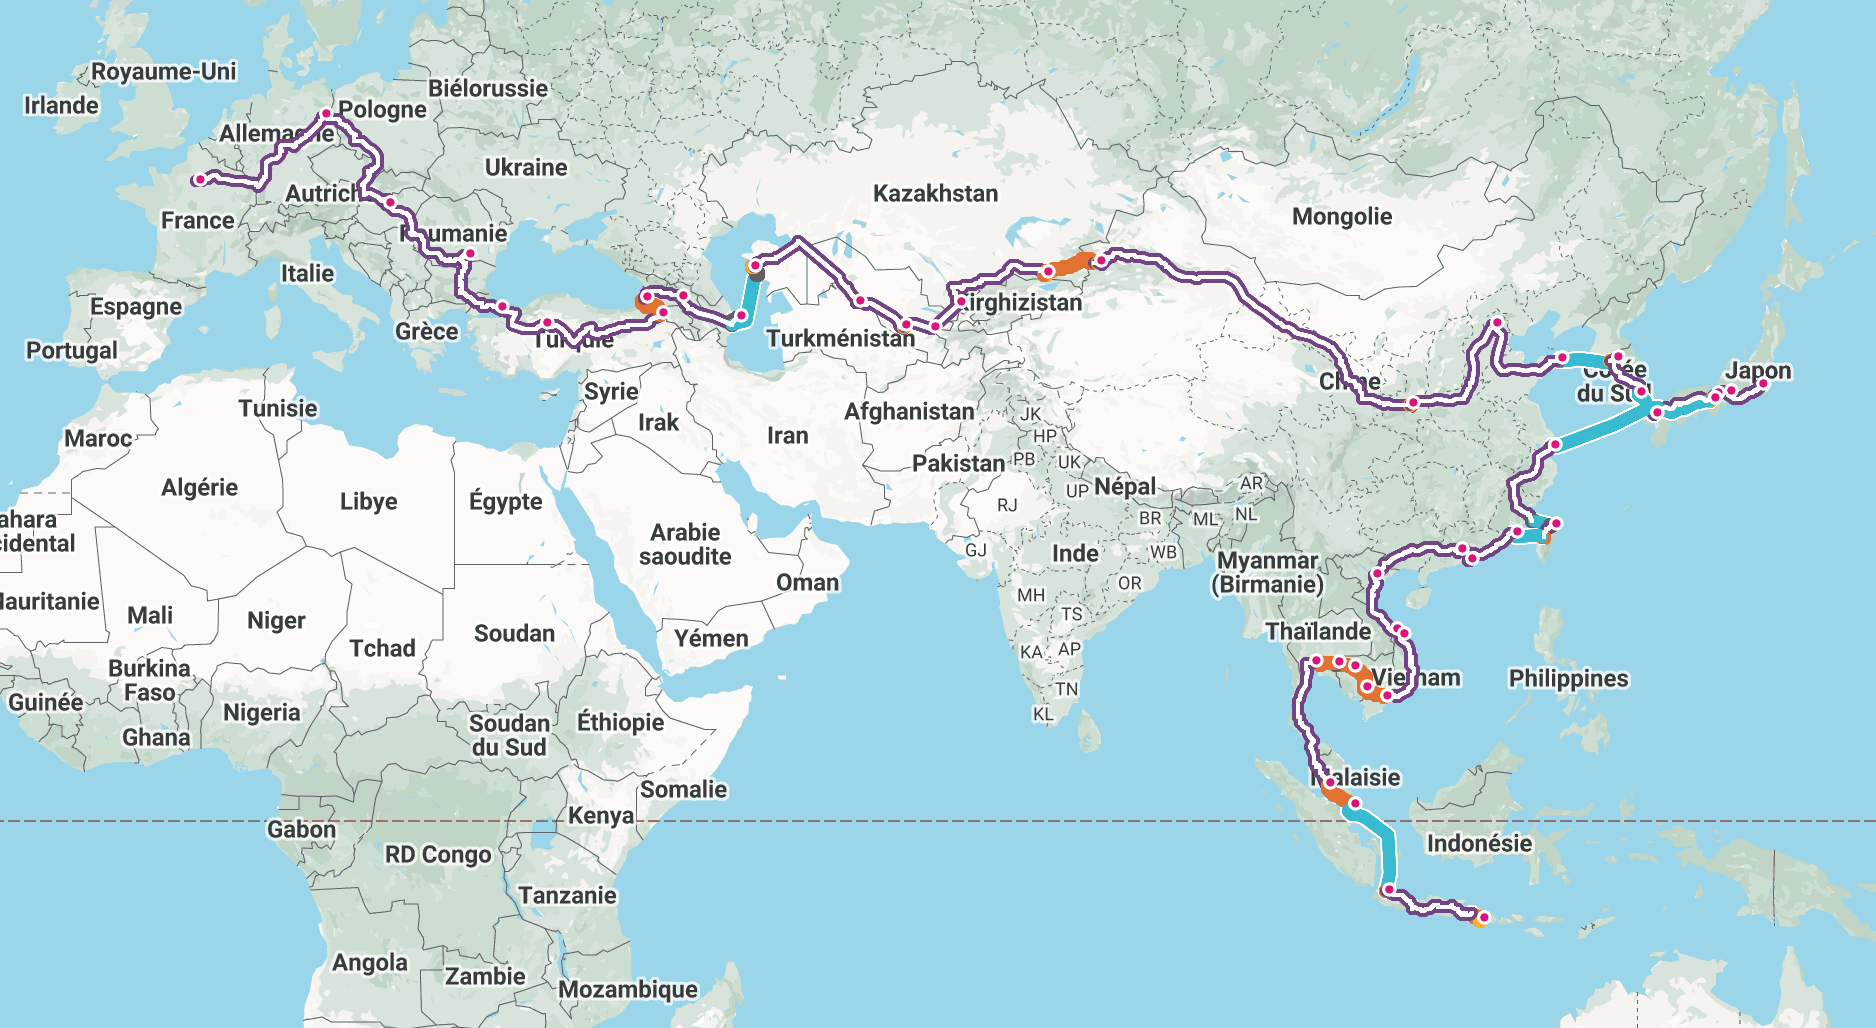 Itinerary from Paris to Bali by train (and boat)